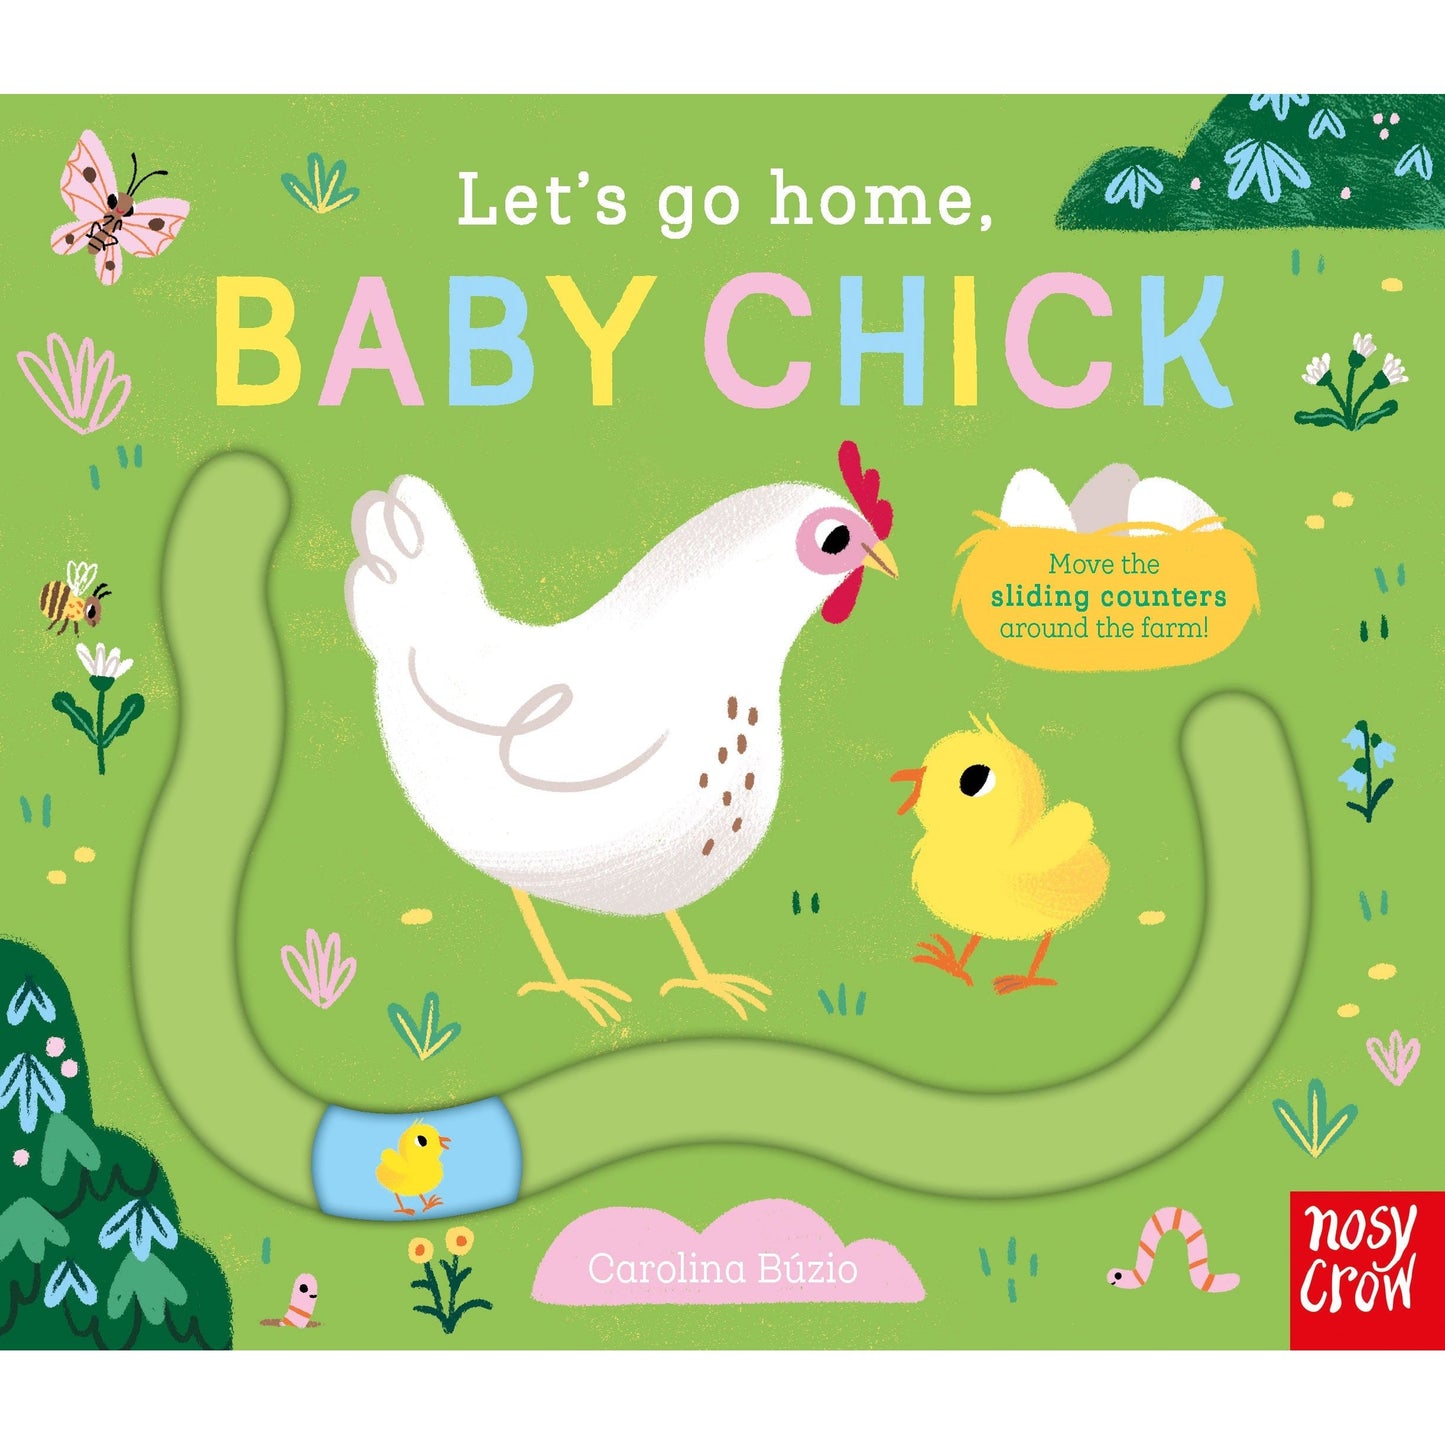 Let's go home, Baby Chick